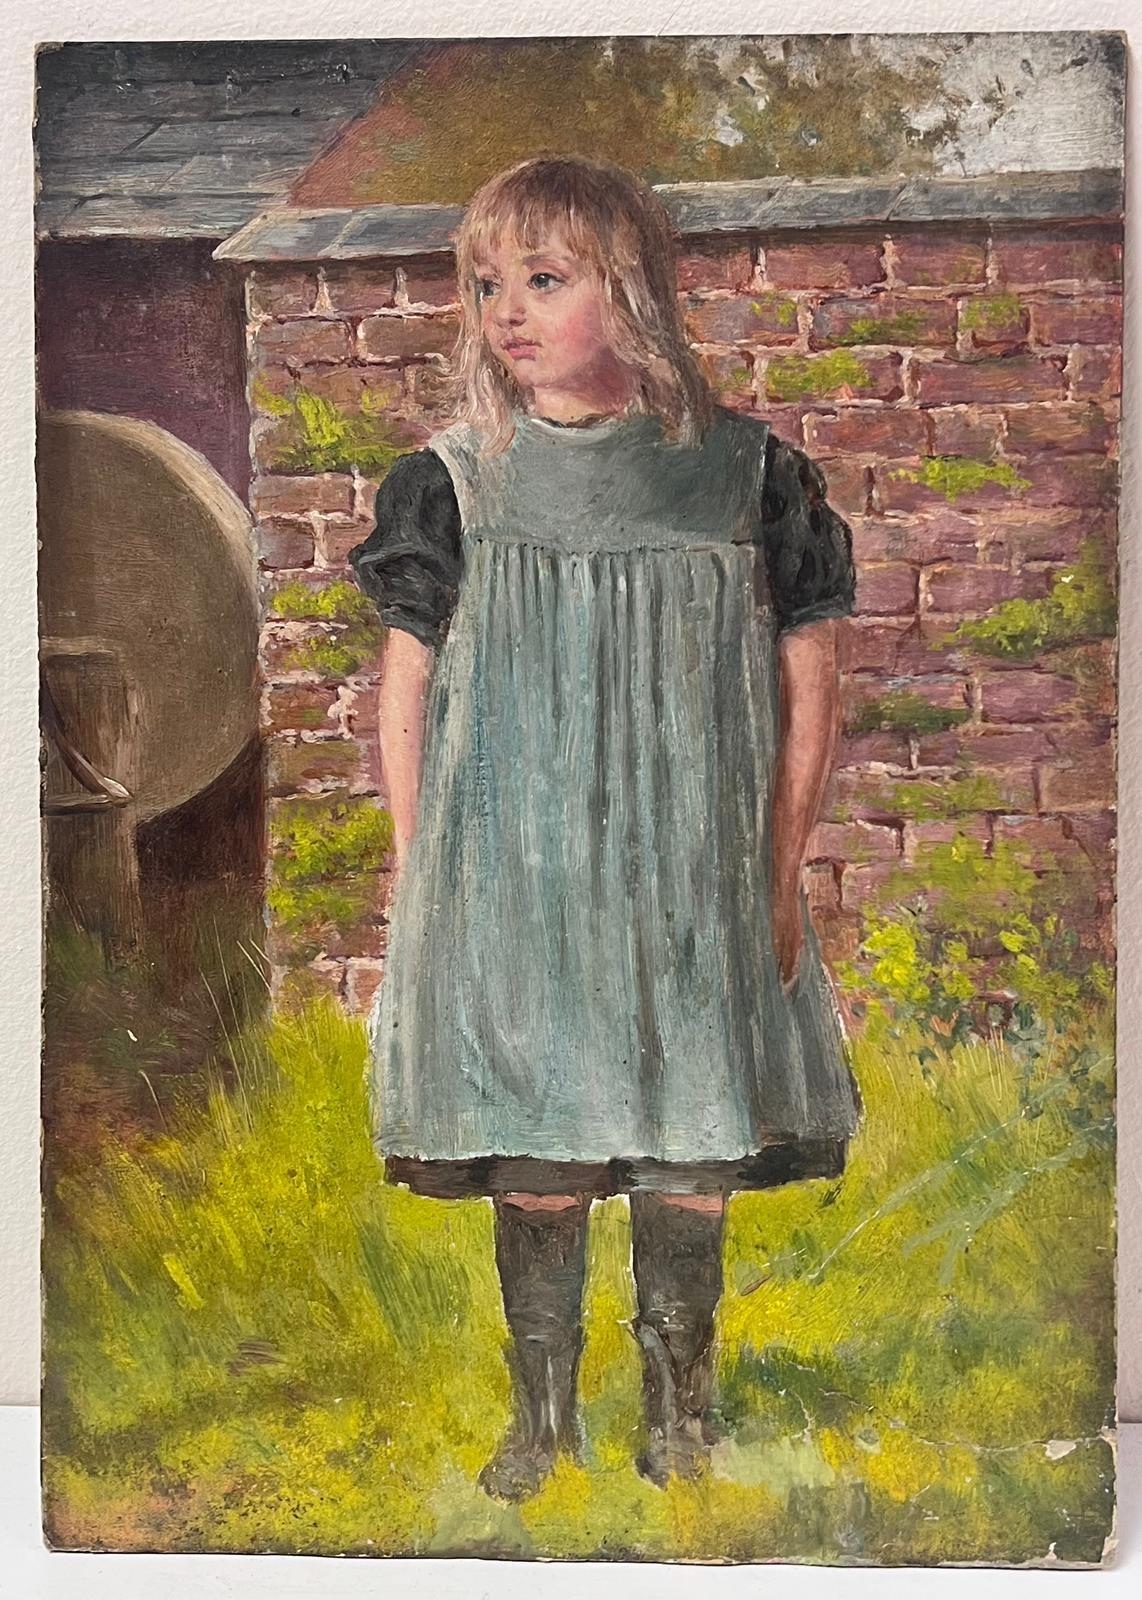 Artist/ School: English School, late 19th/ early 20th century.
The painting came from a large collection of works by one artist. A very few of them are signed what looks to be 'F. Wardle'. 

Title: The Village Girl

Medium: oil on board,